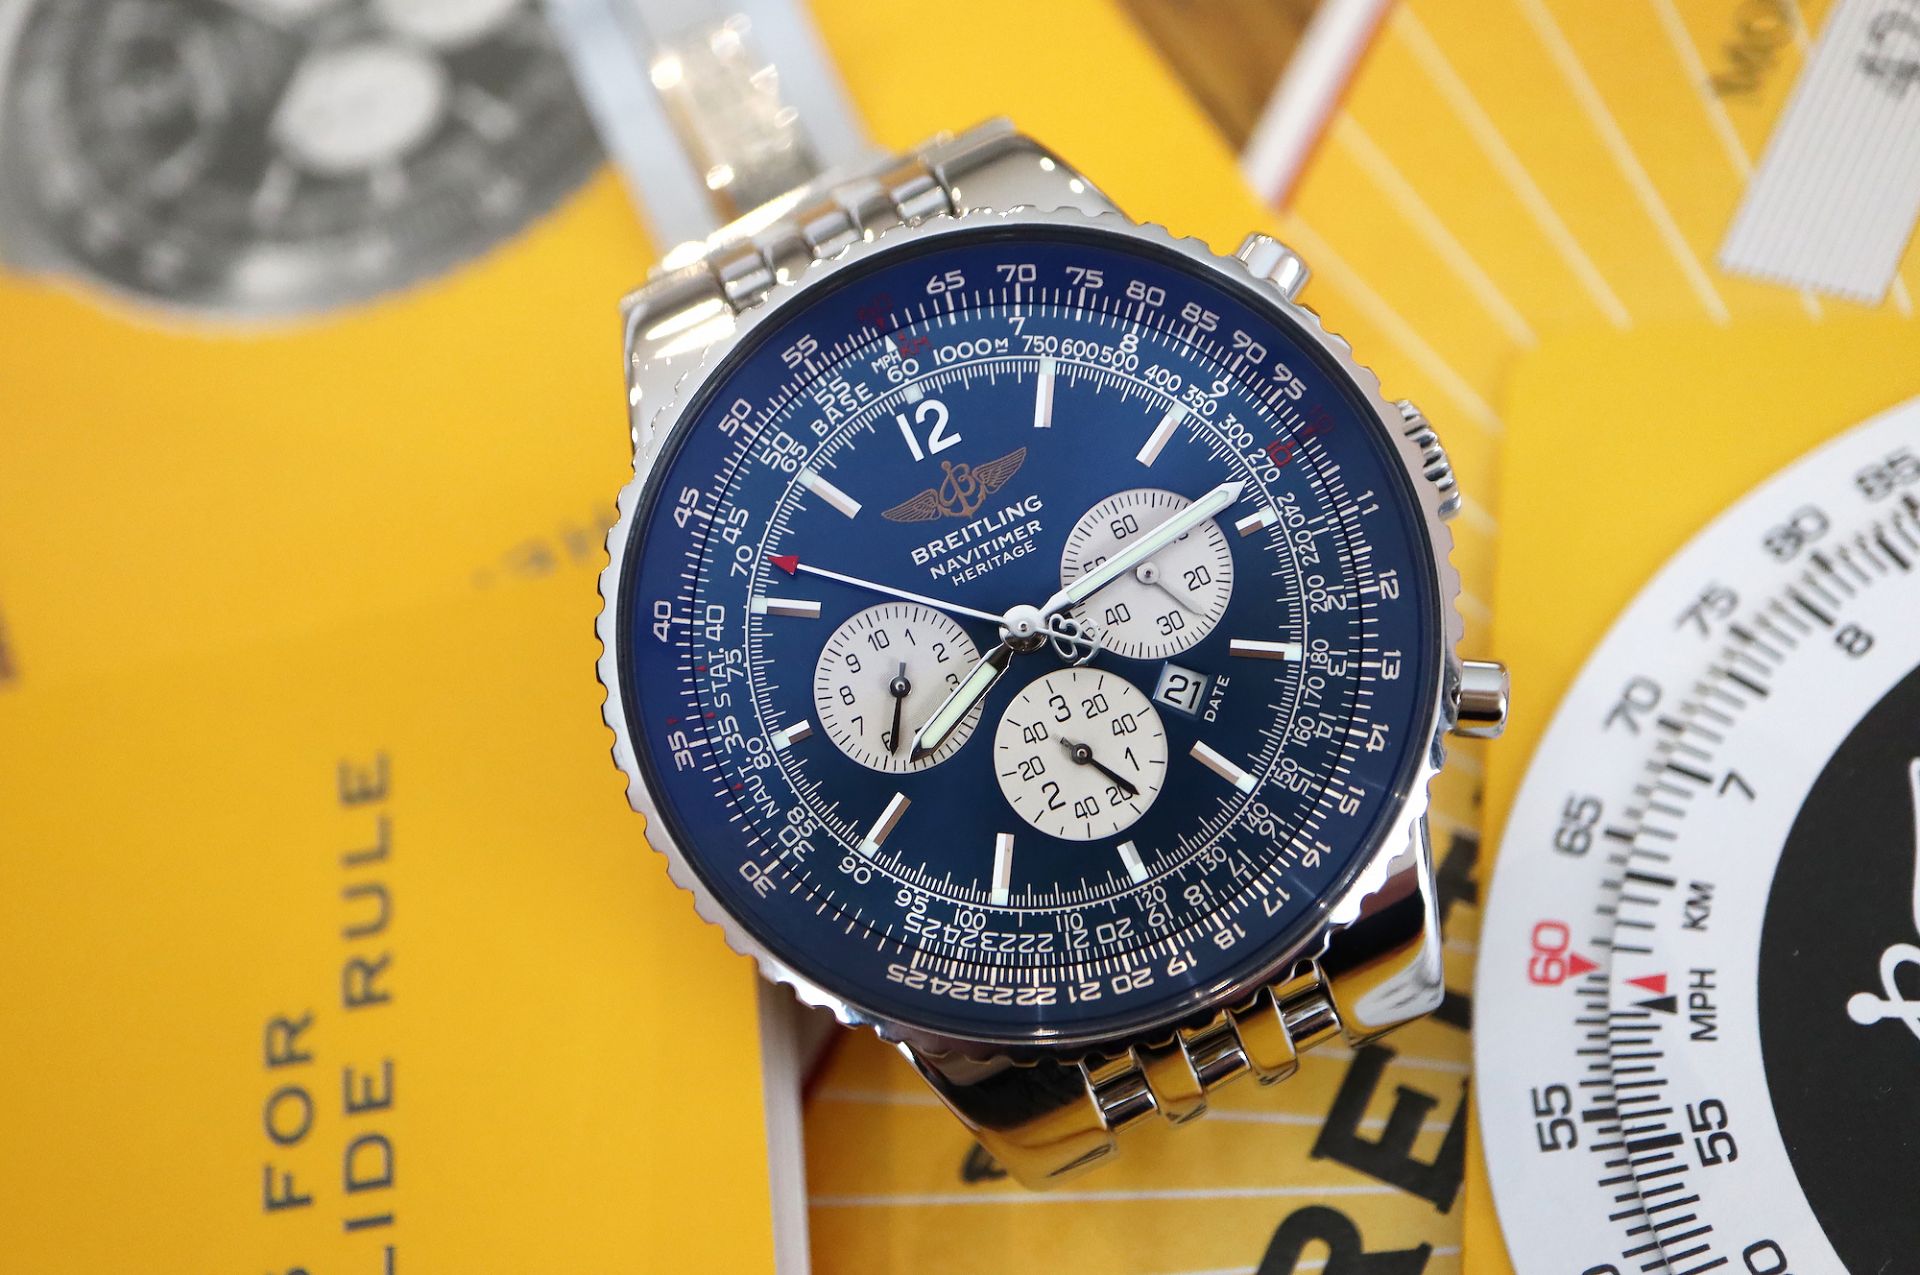 BREITLING NAVITIMER HERITAGE CHRONOGRAPH (REF. A35350) 'FULL SET - BOX, CERTS. ETC.' NAVY DIAL - Image 2 of 16